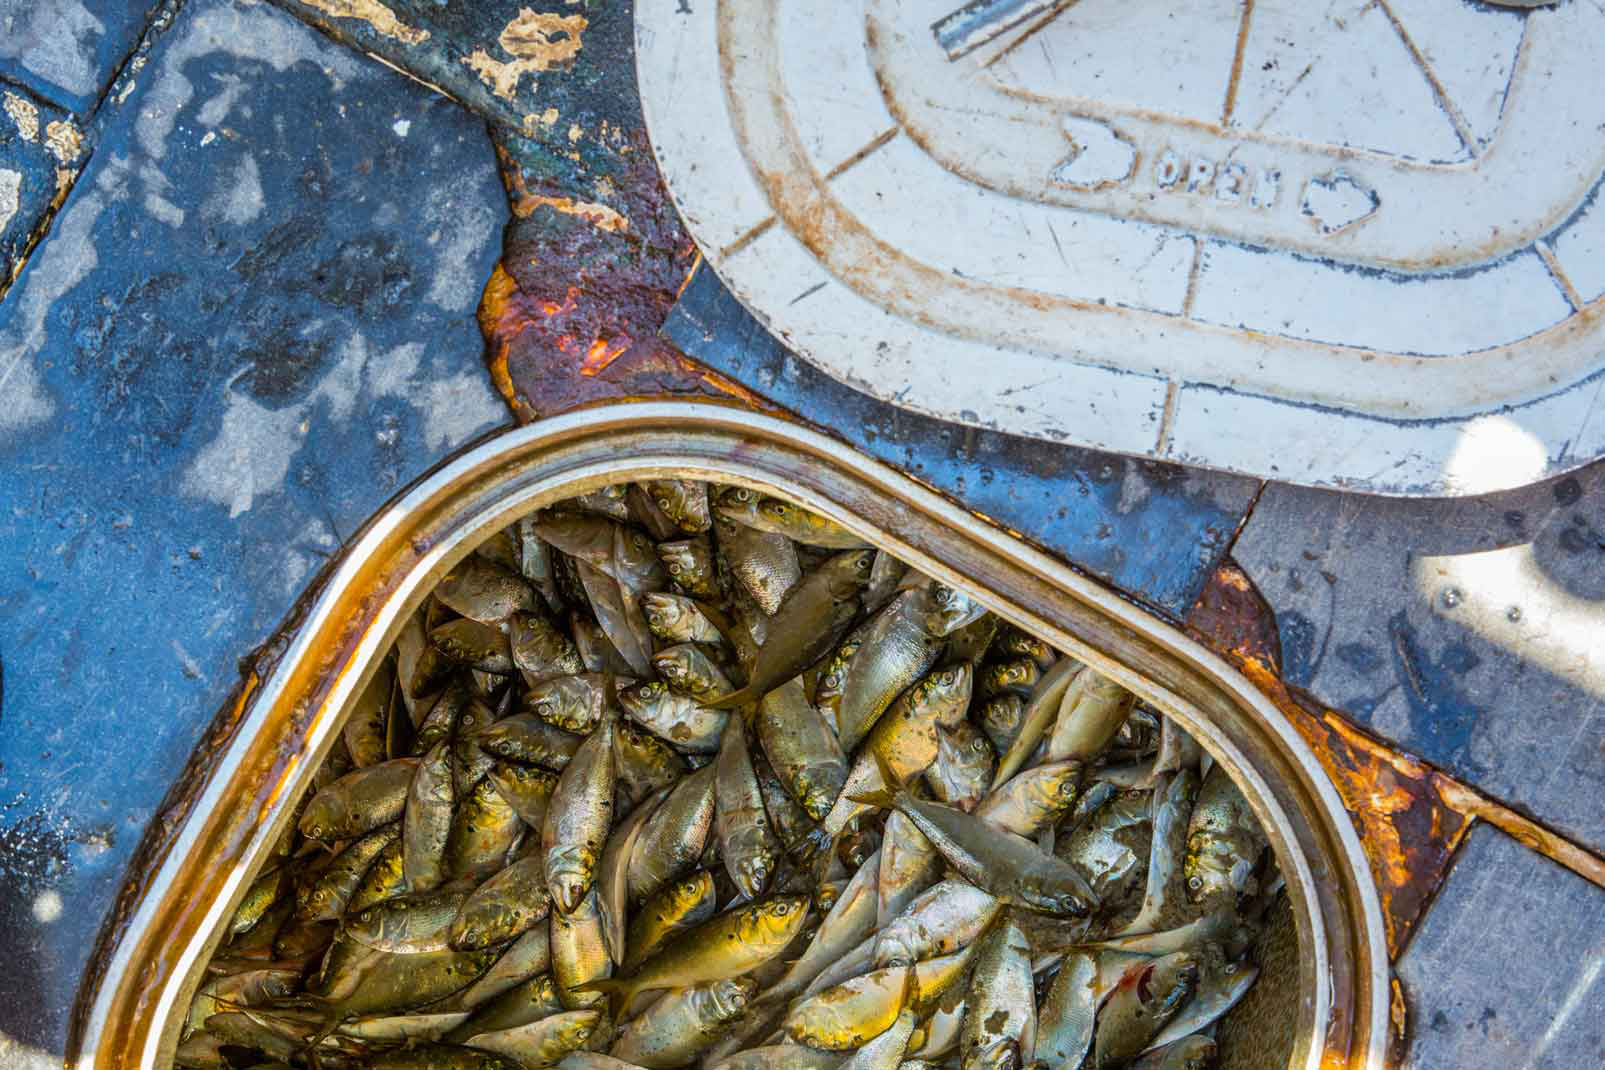 Lund's Fisheries in New Jersey, one of the largest seafood processors in the mid-Atlantic, offloads a fish called menhaden, which is used as crab and lobster bait. Lund’s sells it to fisheries from Maine to the Gulf of Mexico. Photo © Jason Houston